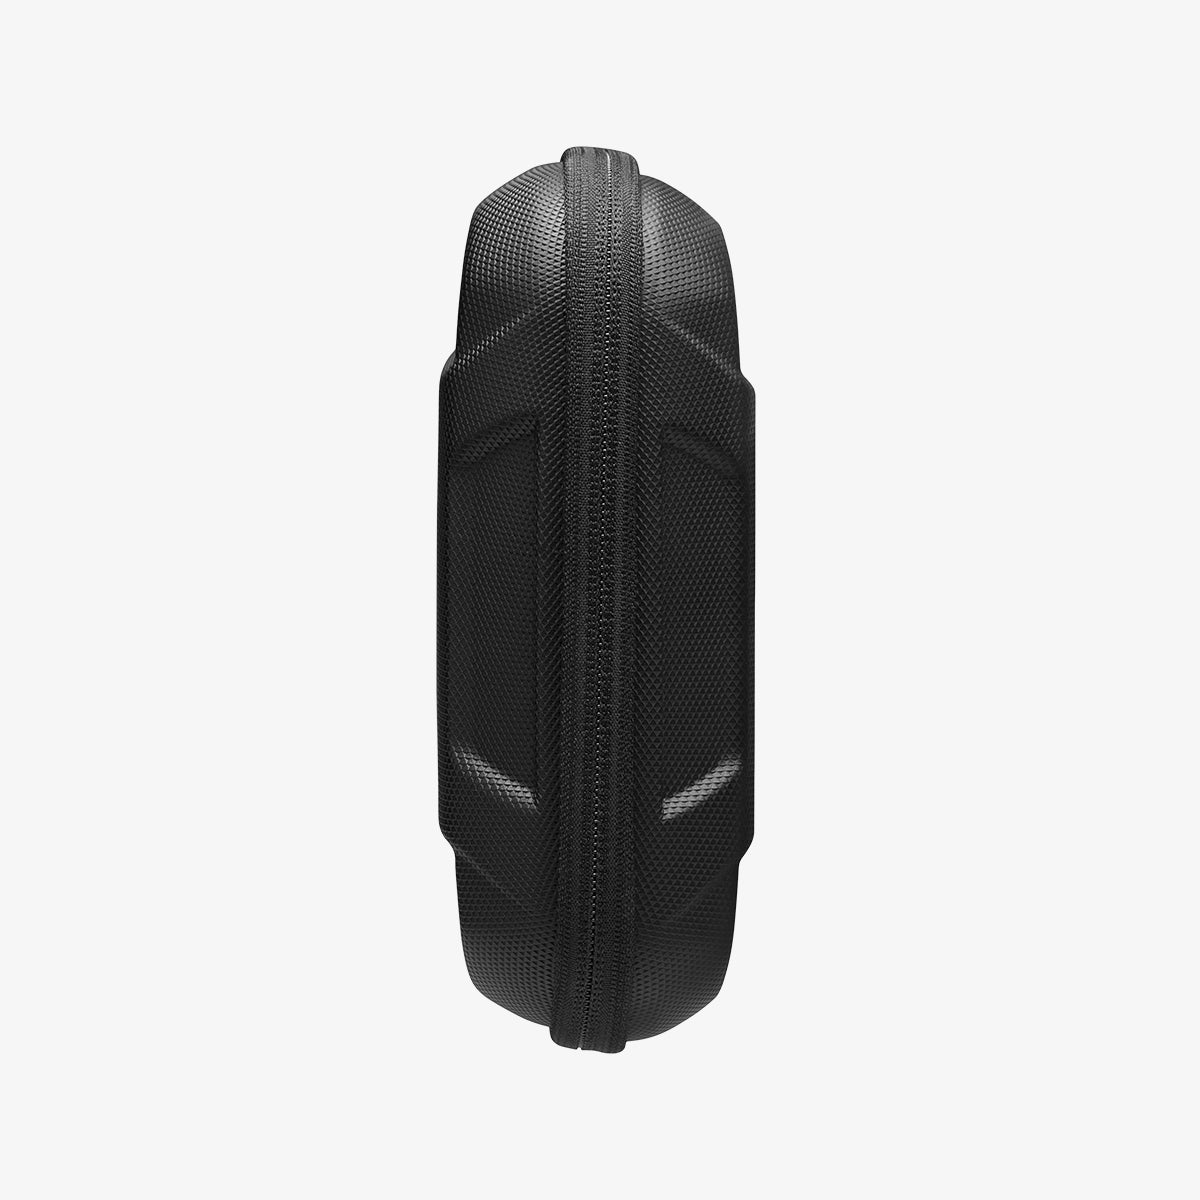 AFA04310 - DJI Action 2 Case Rugged Armor Pro Pouch in black showing the side